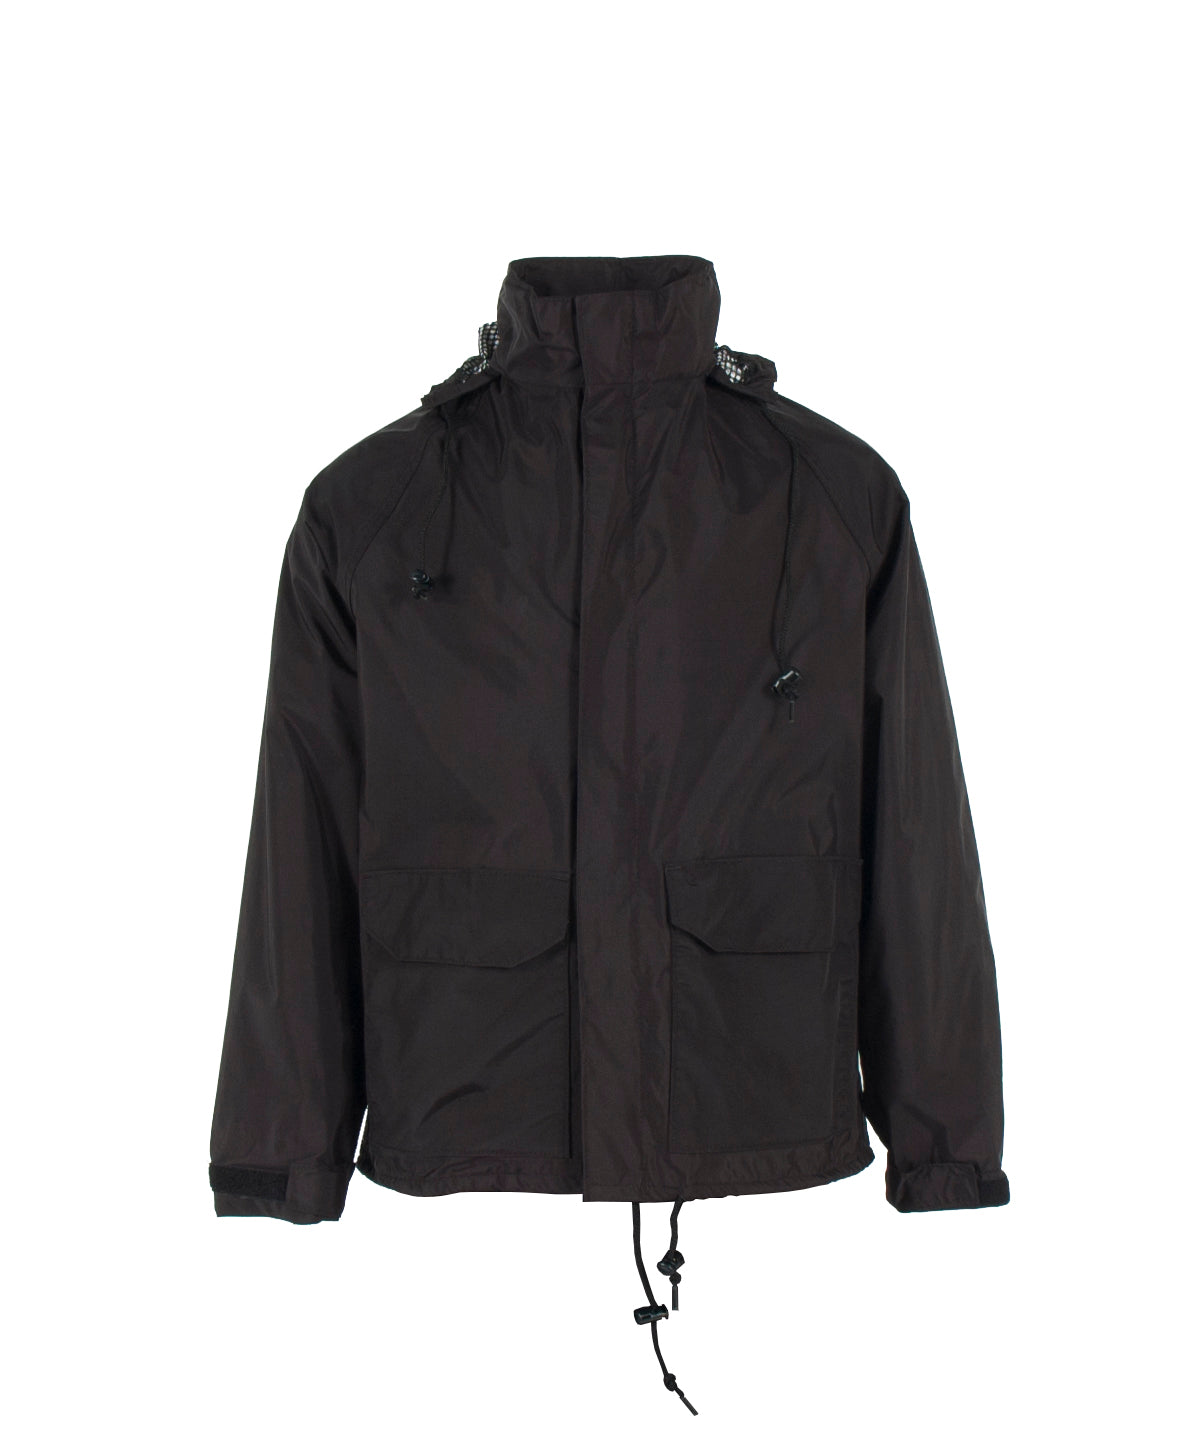 Neese 523AJ Breathable Jacket with Attached Hood